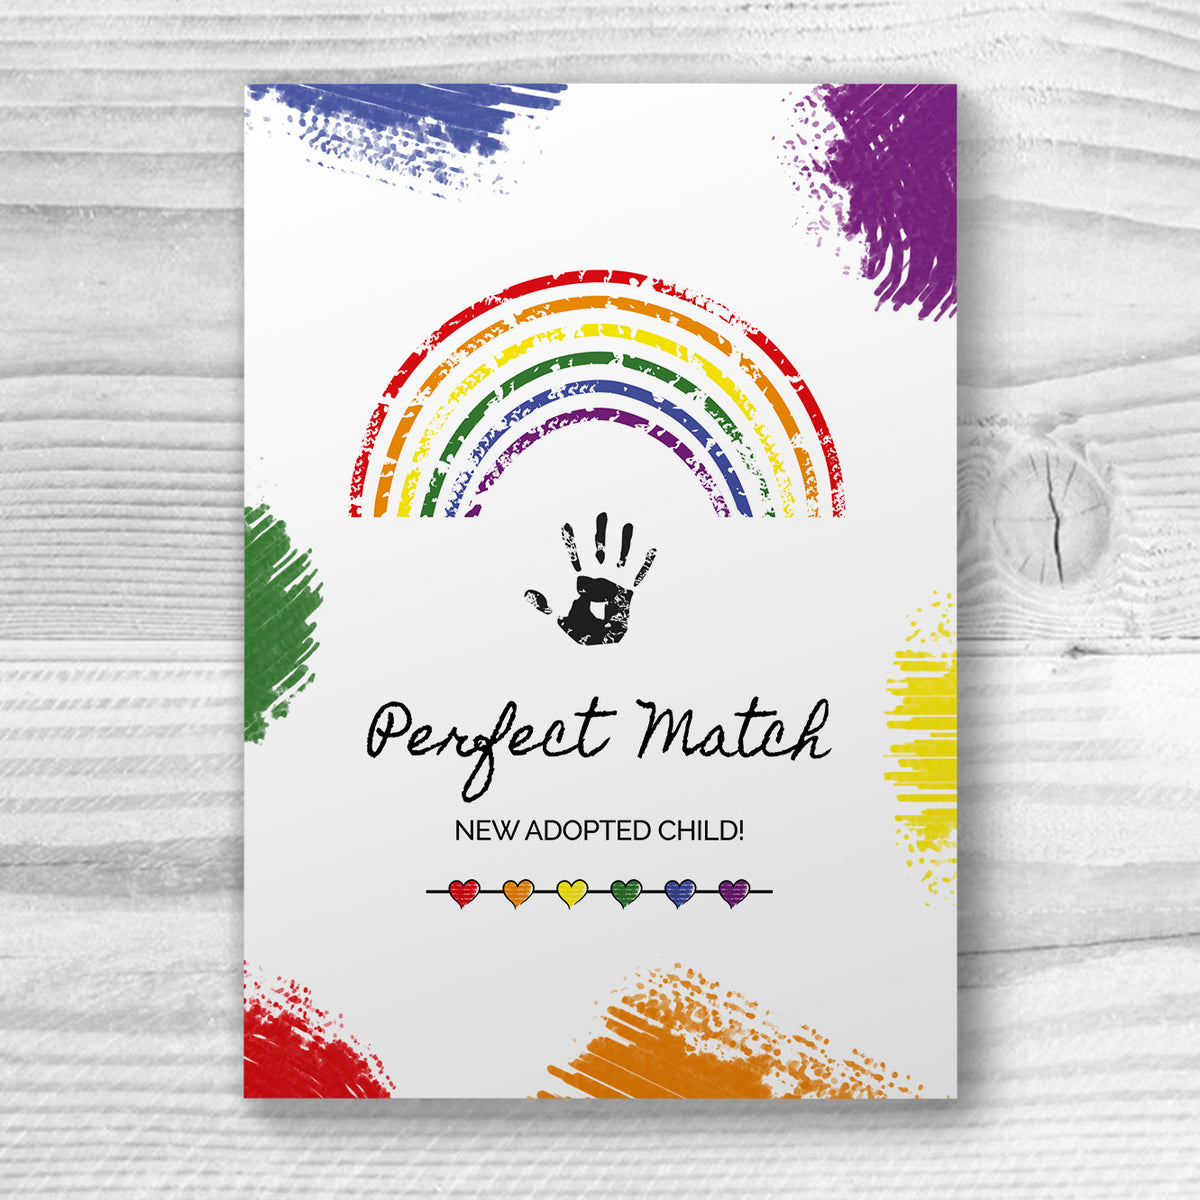 Perfect match new adopted child - Adoption Card | Gift